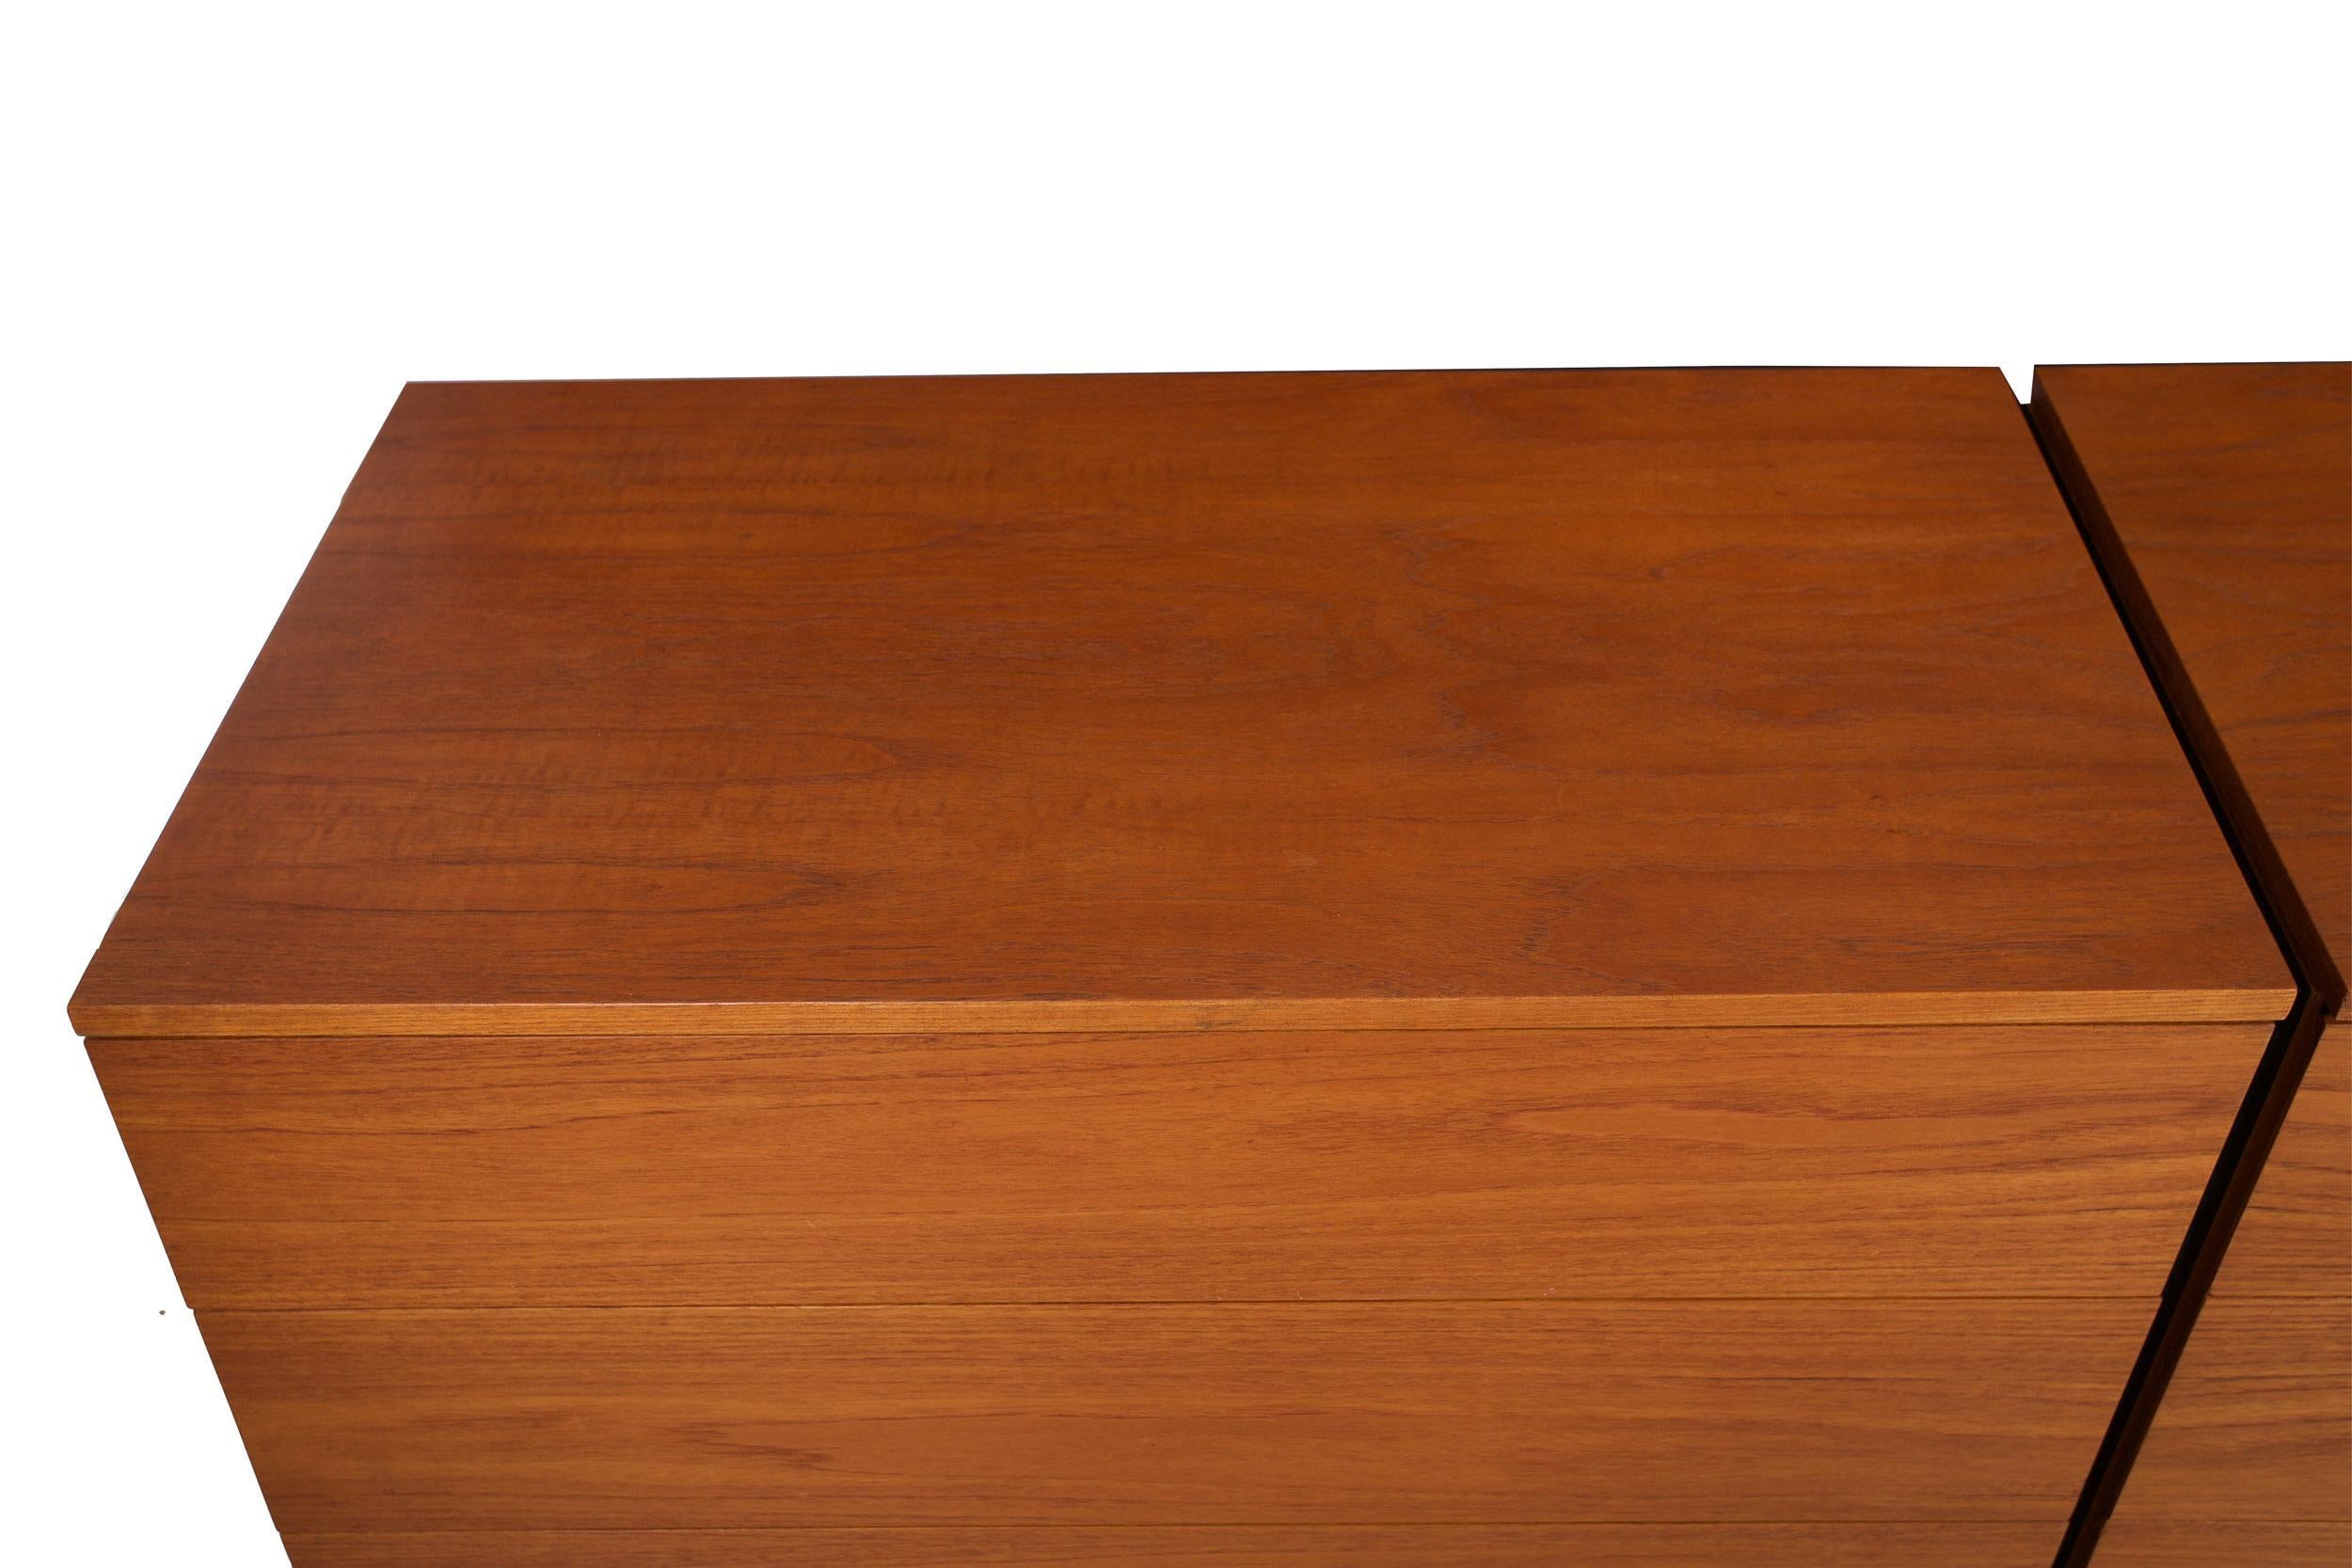 Knoll Mid-Century Modern Teak and Chrome Double Chest Credenza, circa 1970 For Sale 7